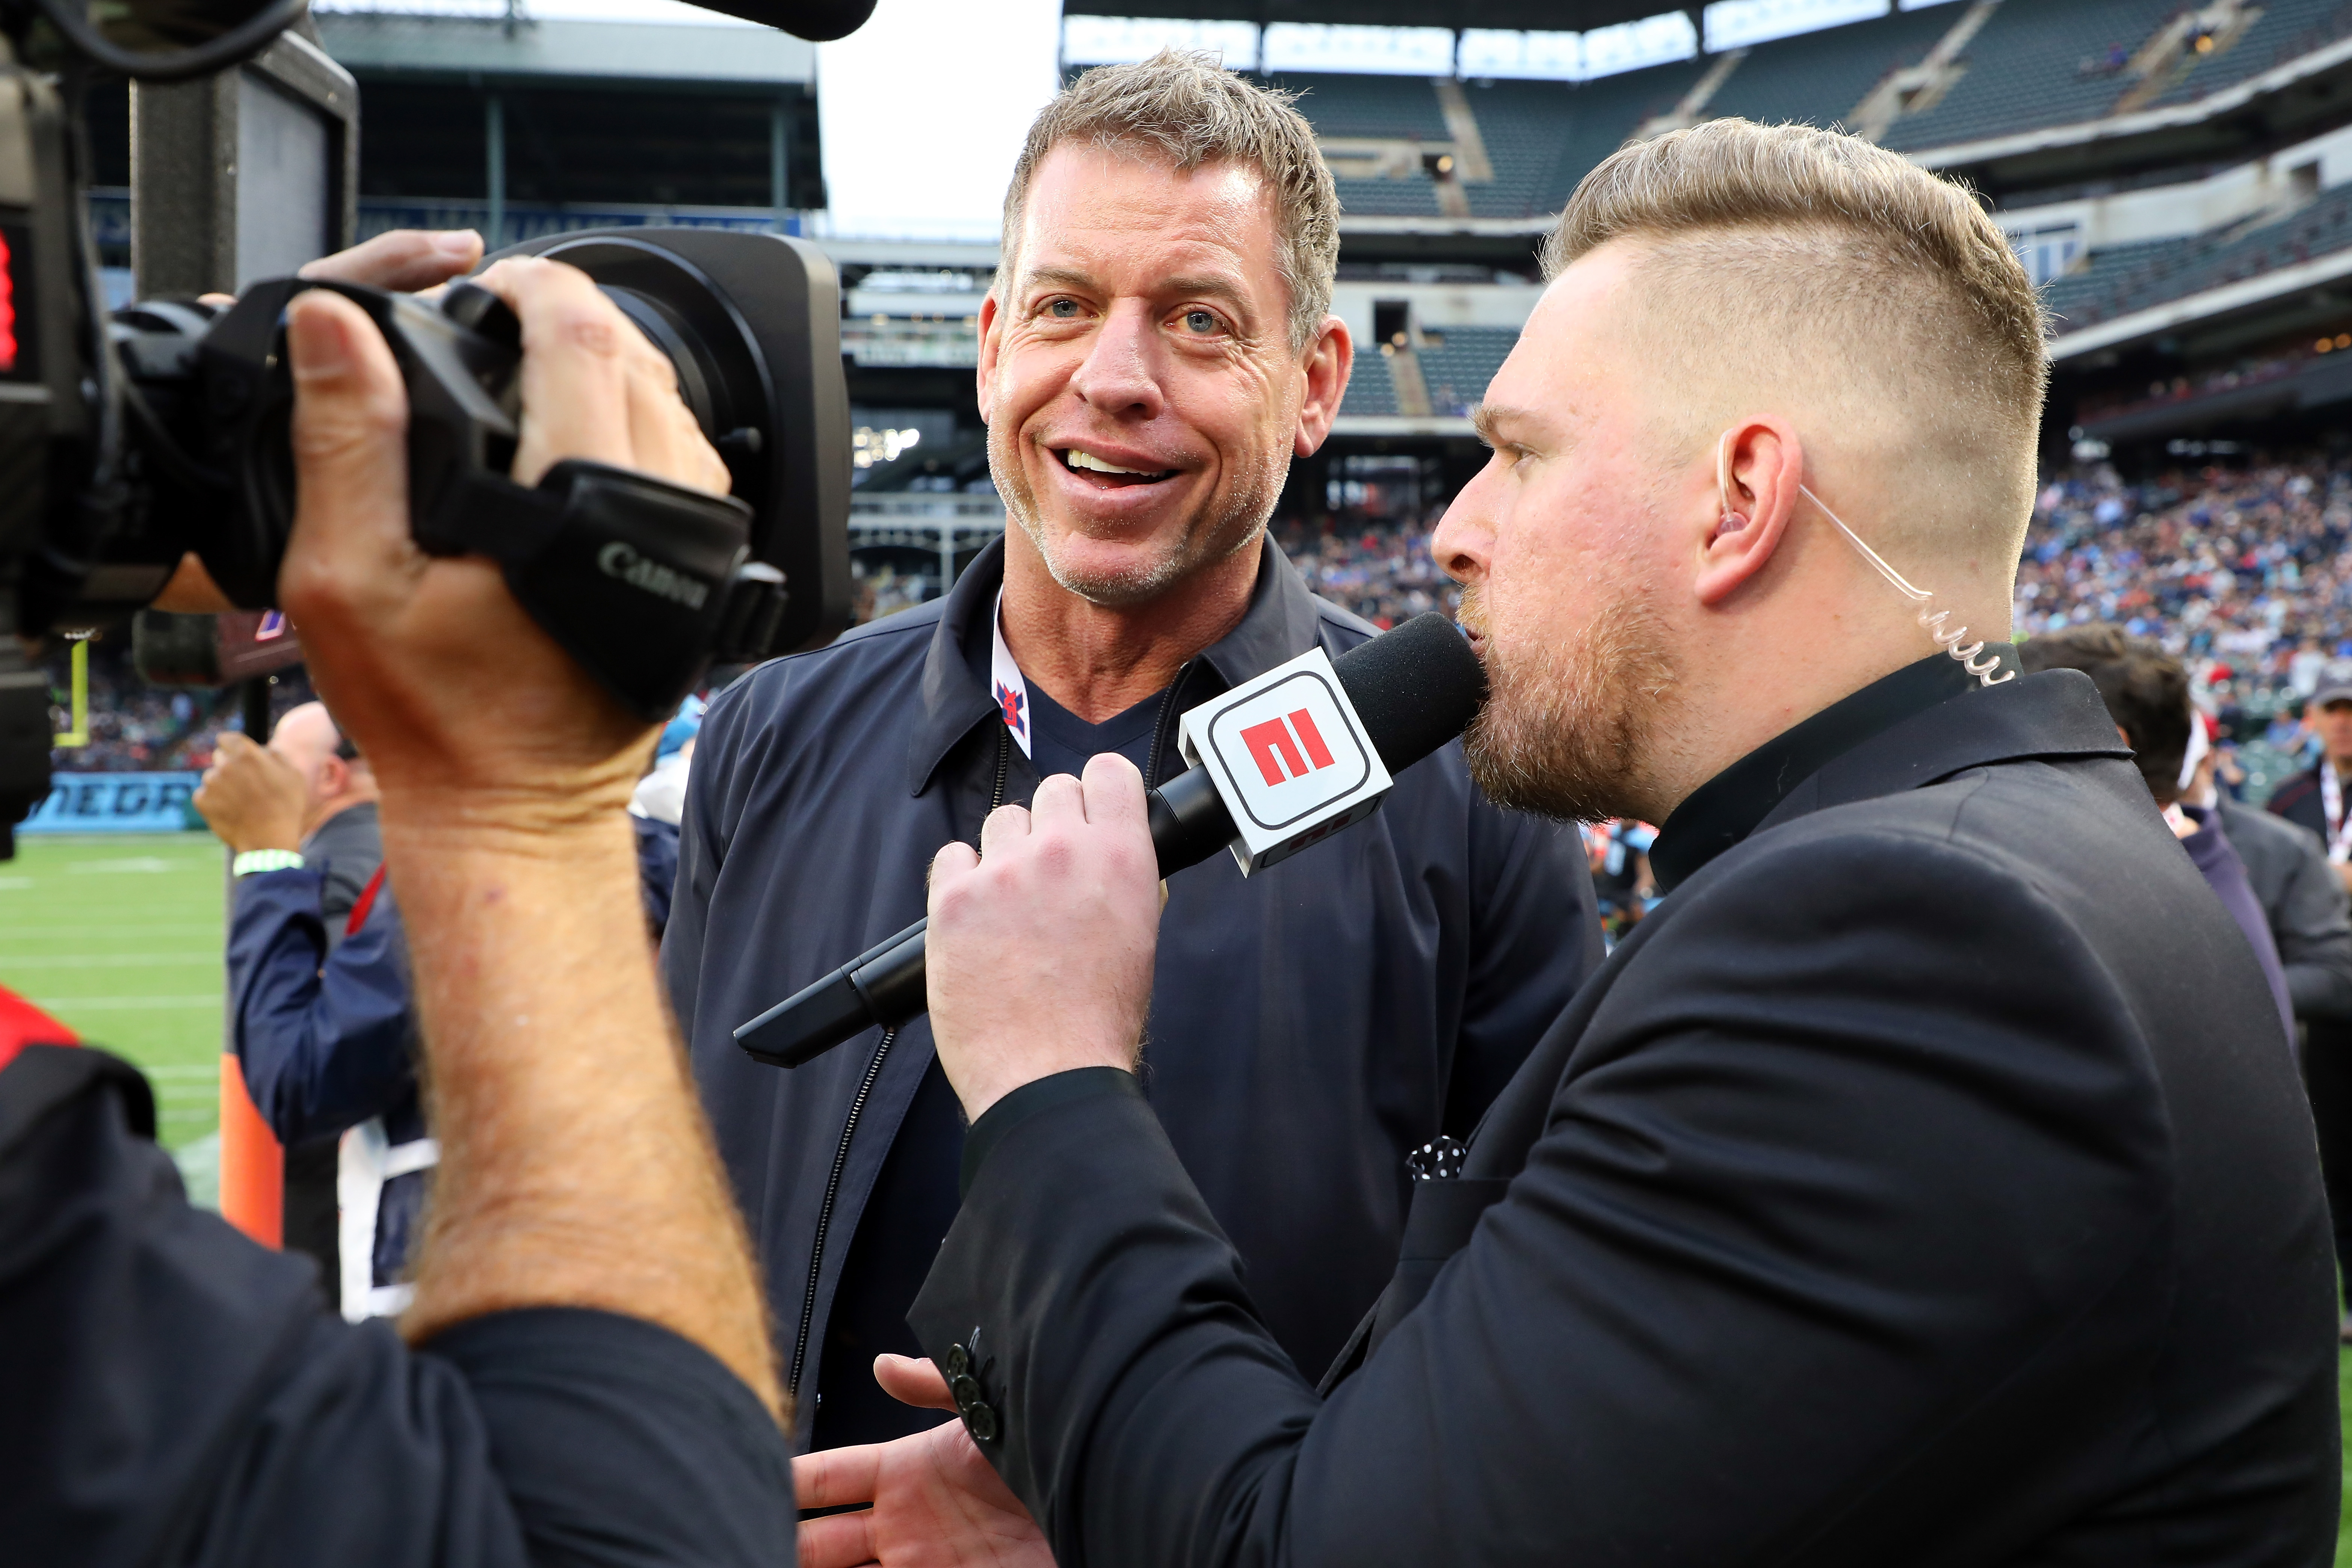 Troy Aikman is interviewed by Pat McAfee during a 2020 XFL football game